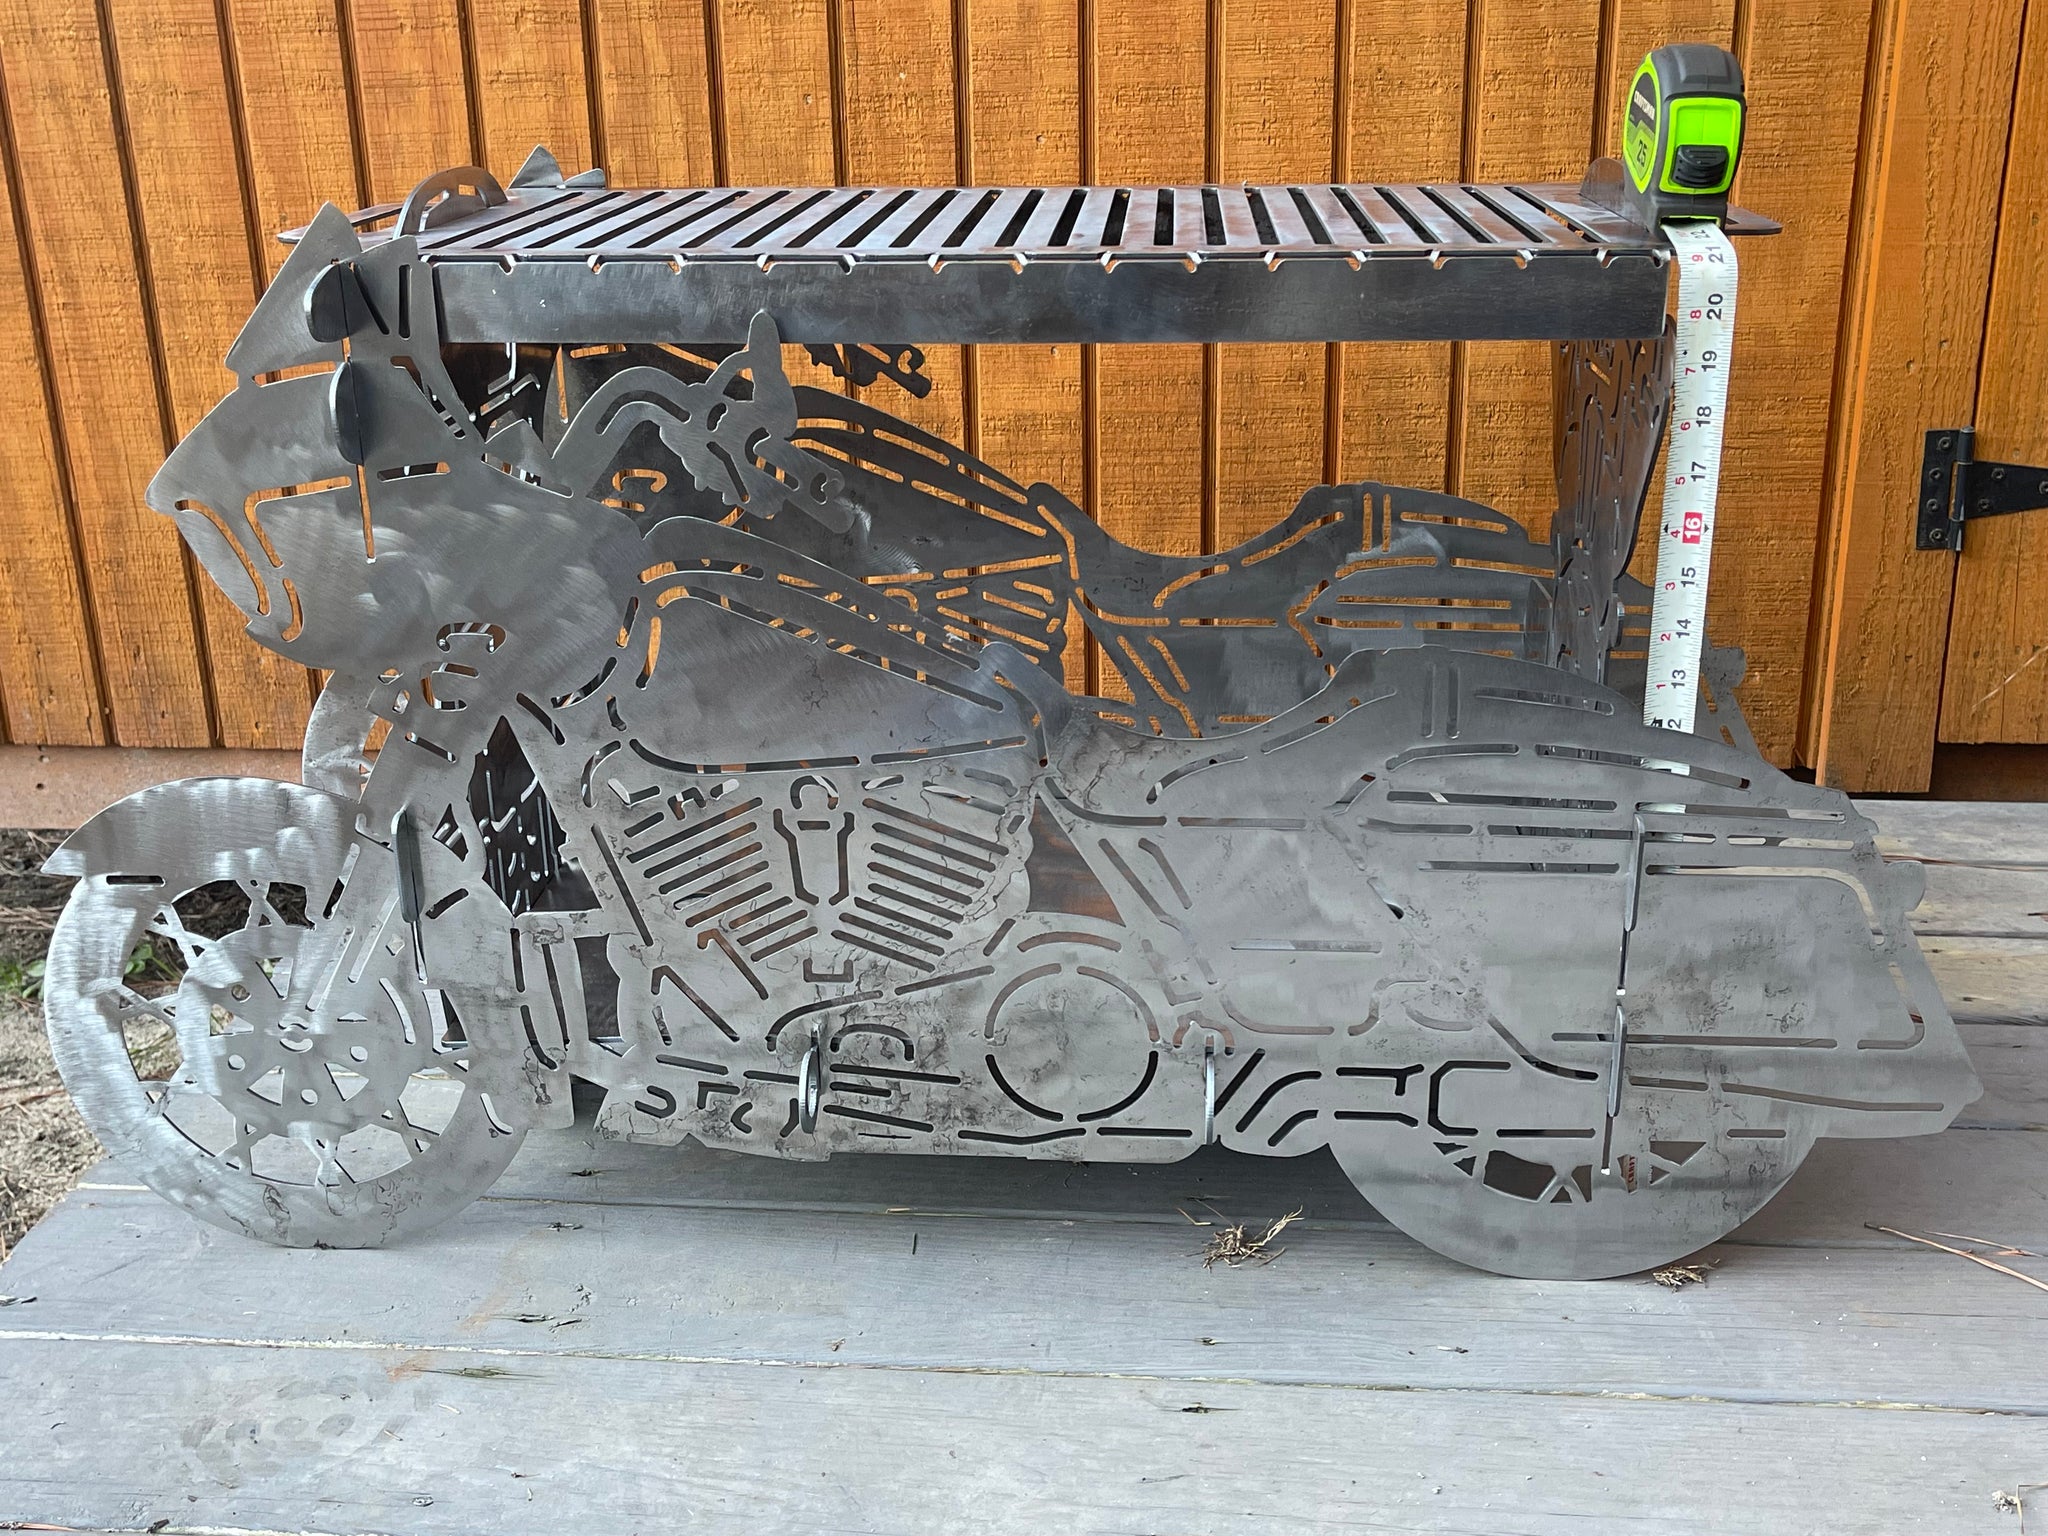 Motorcycle Fire Pit/Grill